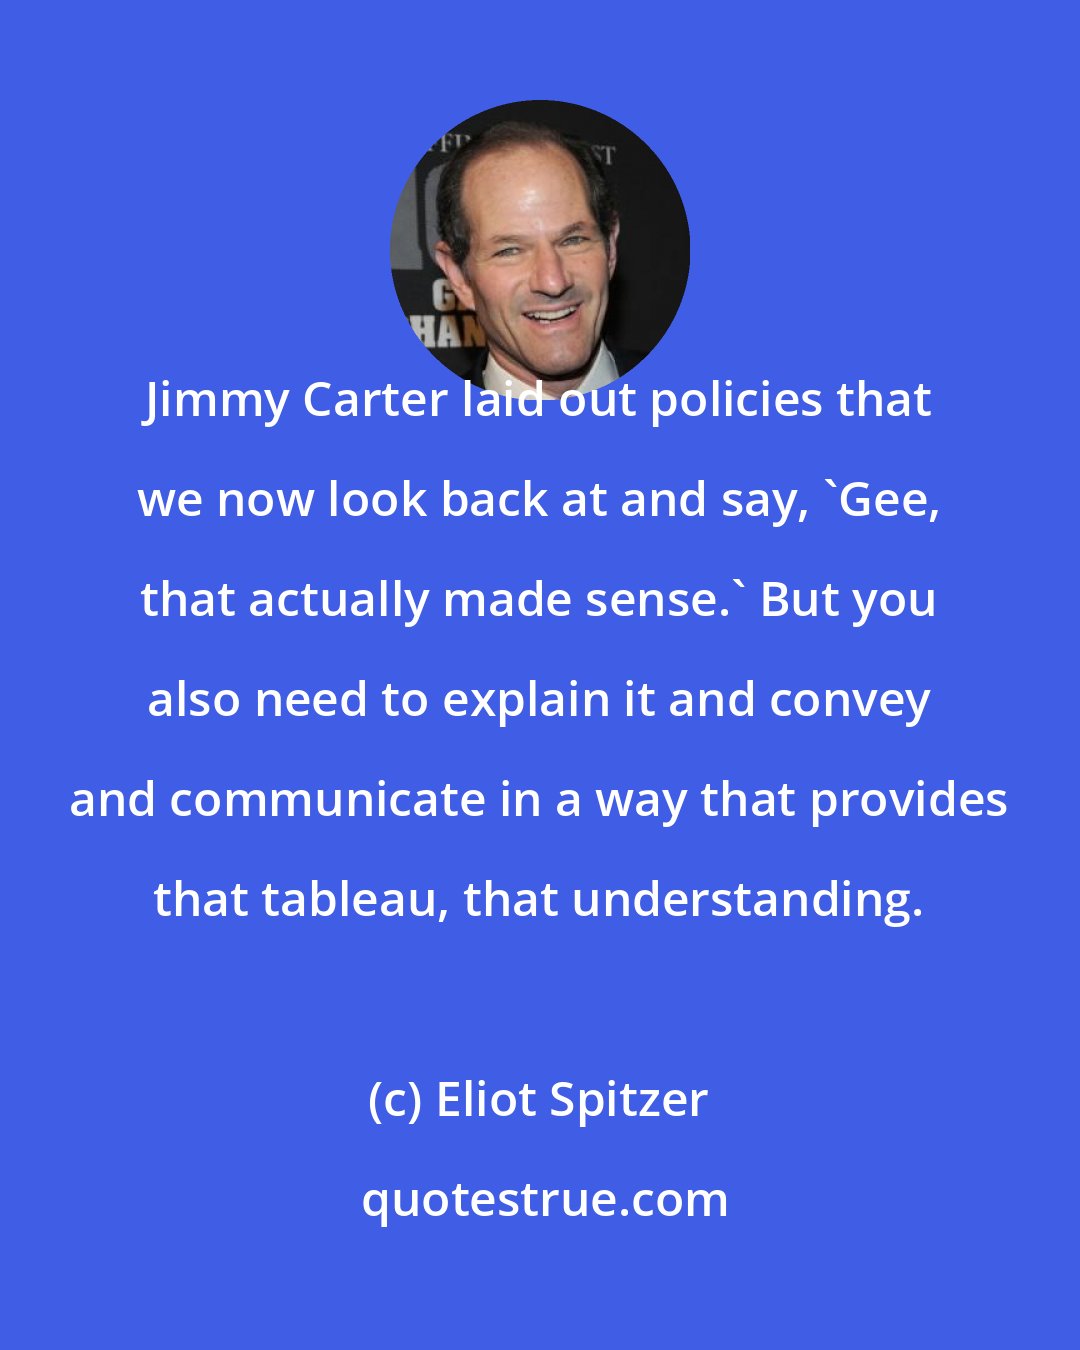 Eliot Spitzer: Jimmy Carter laid out policies that we now look back at and say, 'Gee, that actually made sense.' But you also need to explain it and convey and communicate in a way that provides that tableau, that understanding.